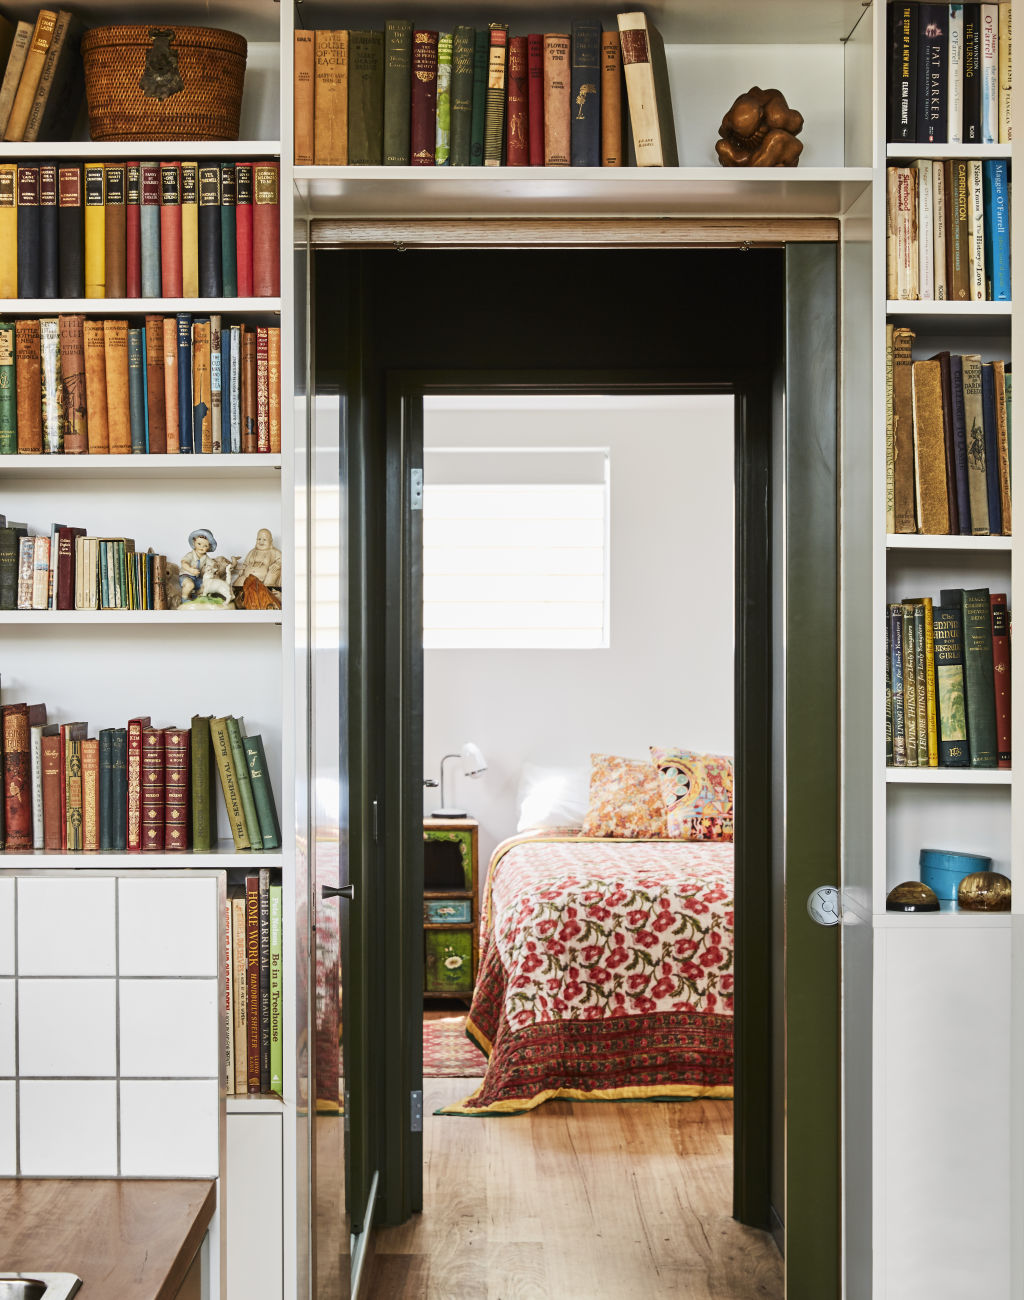 Glenn’s father collected old books, and she says she has ‘inherited a love for them’. Styling: Annie Portelli. Photo: Caitlin Mills